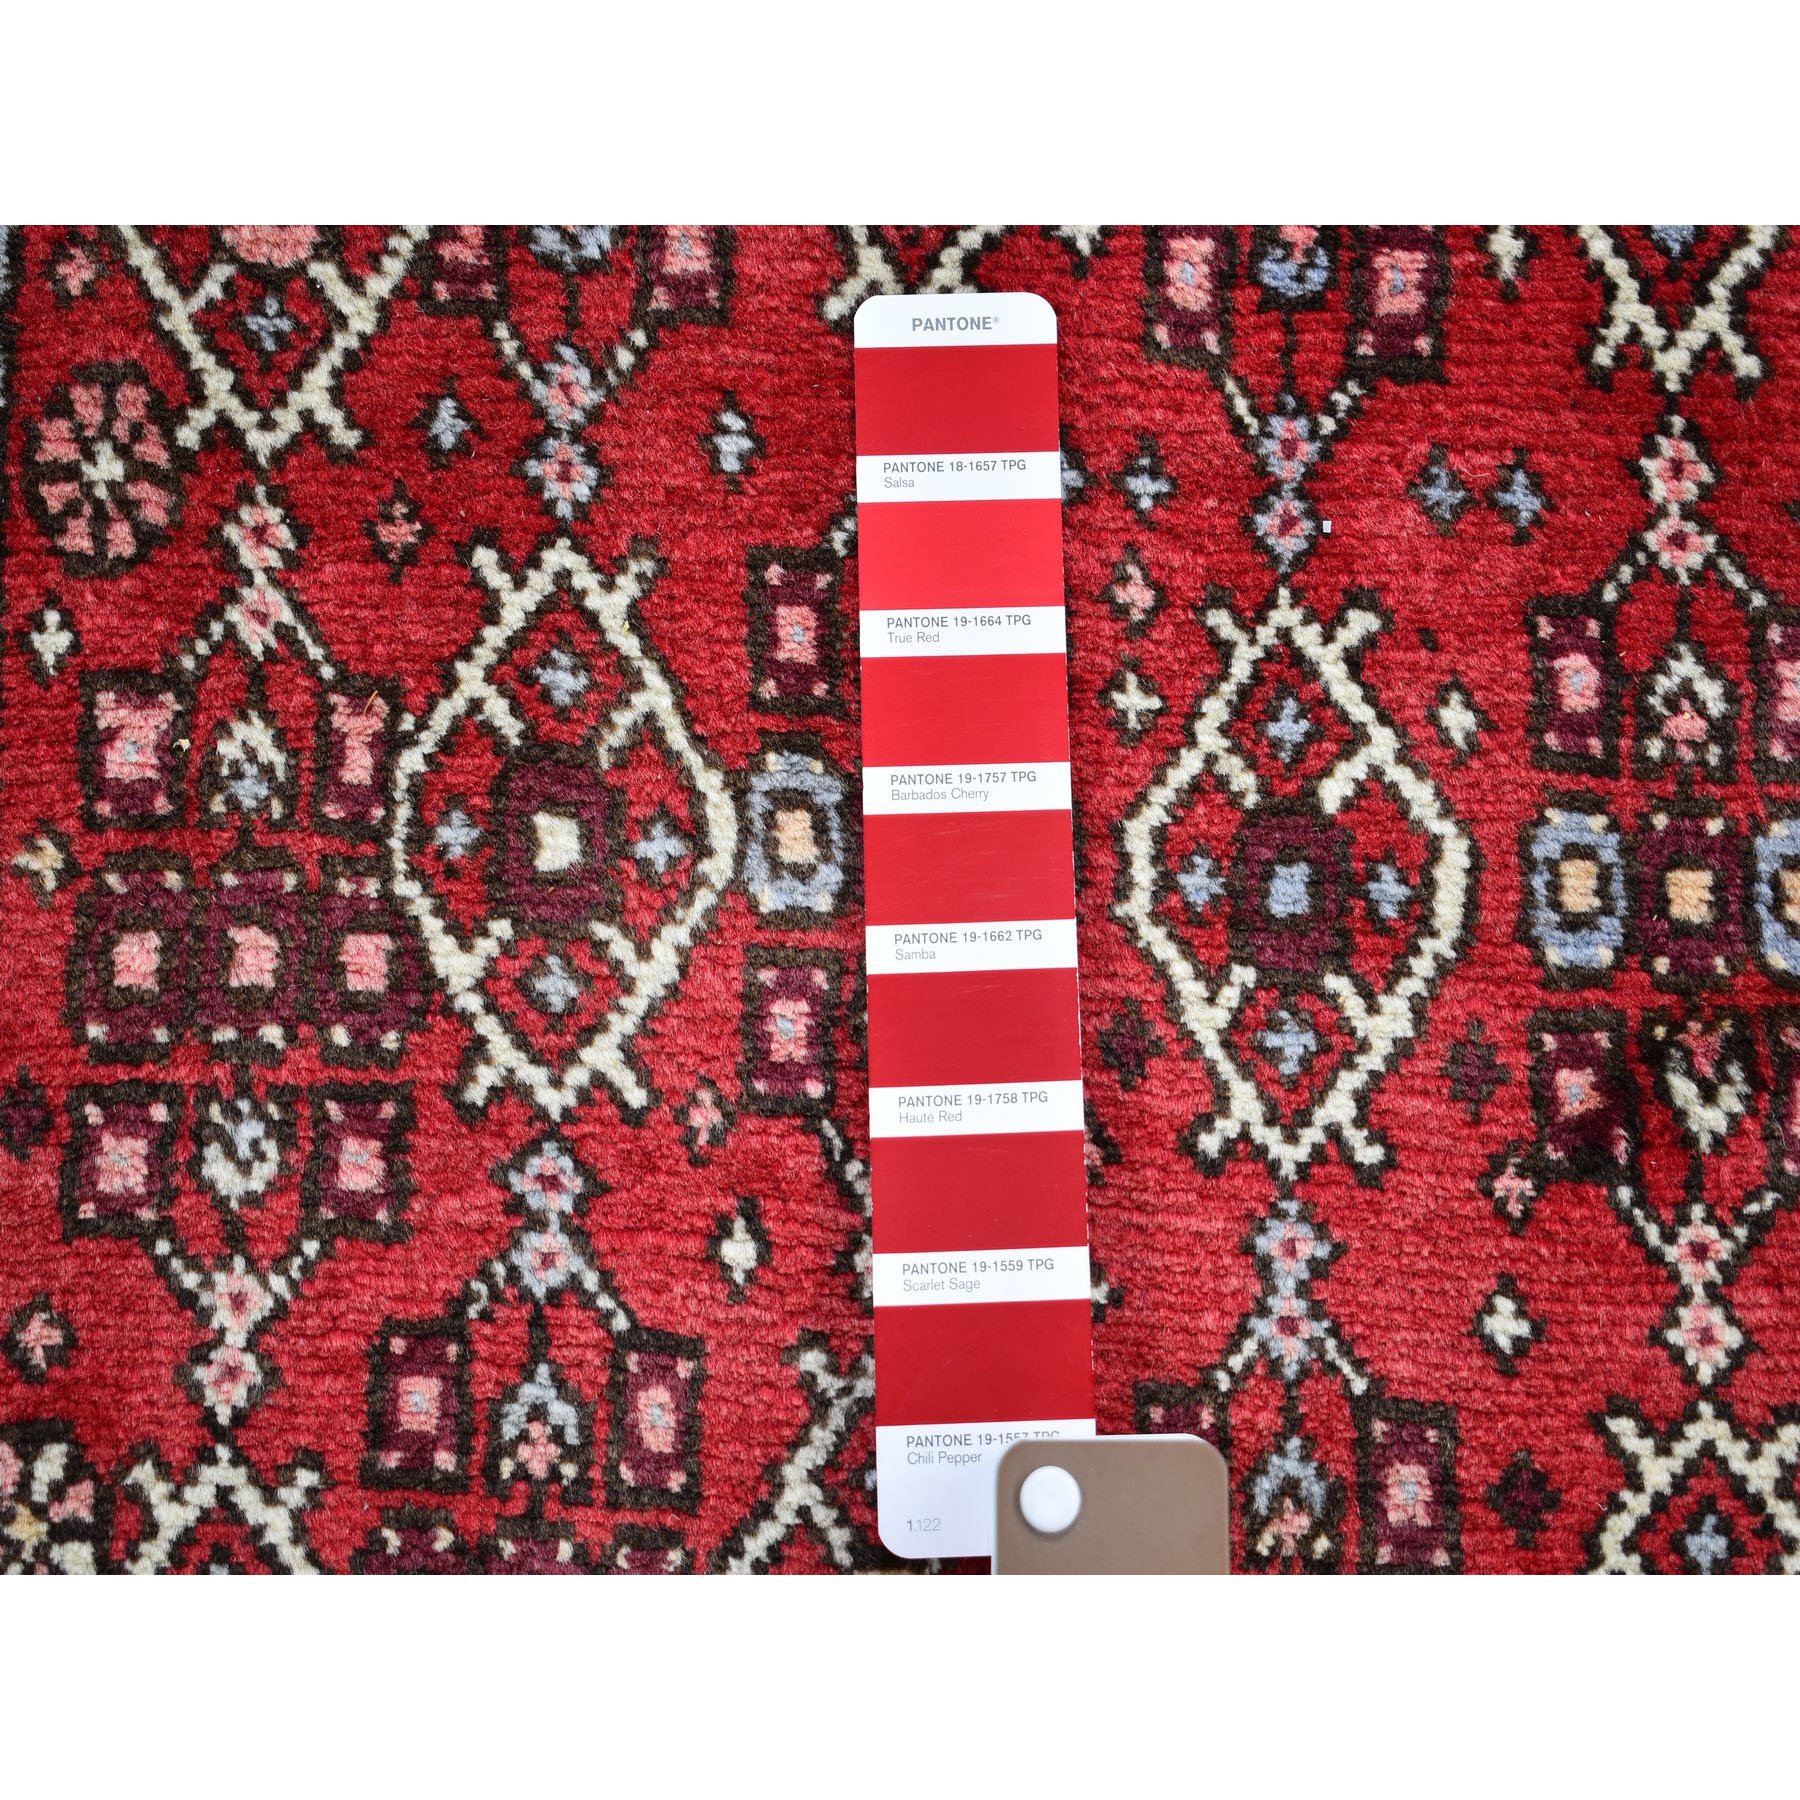 2-8 x9-7   Red New Persian Hamadan All Over Design Pure Wool Hand Knotted Oriental Rug 